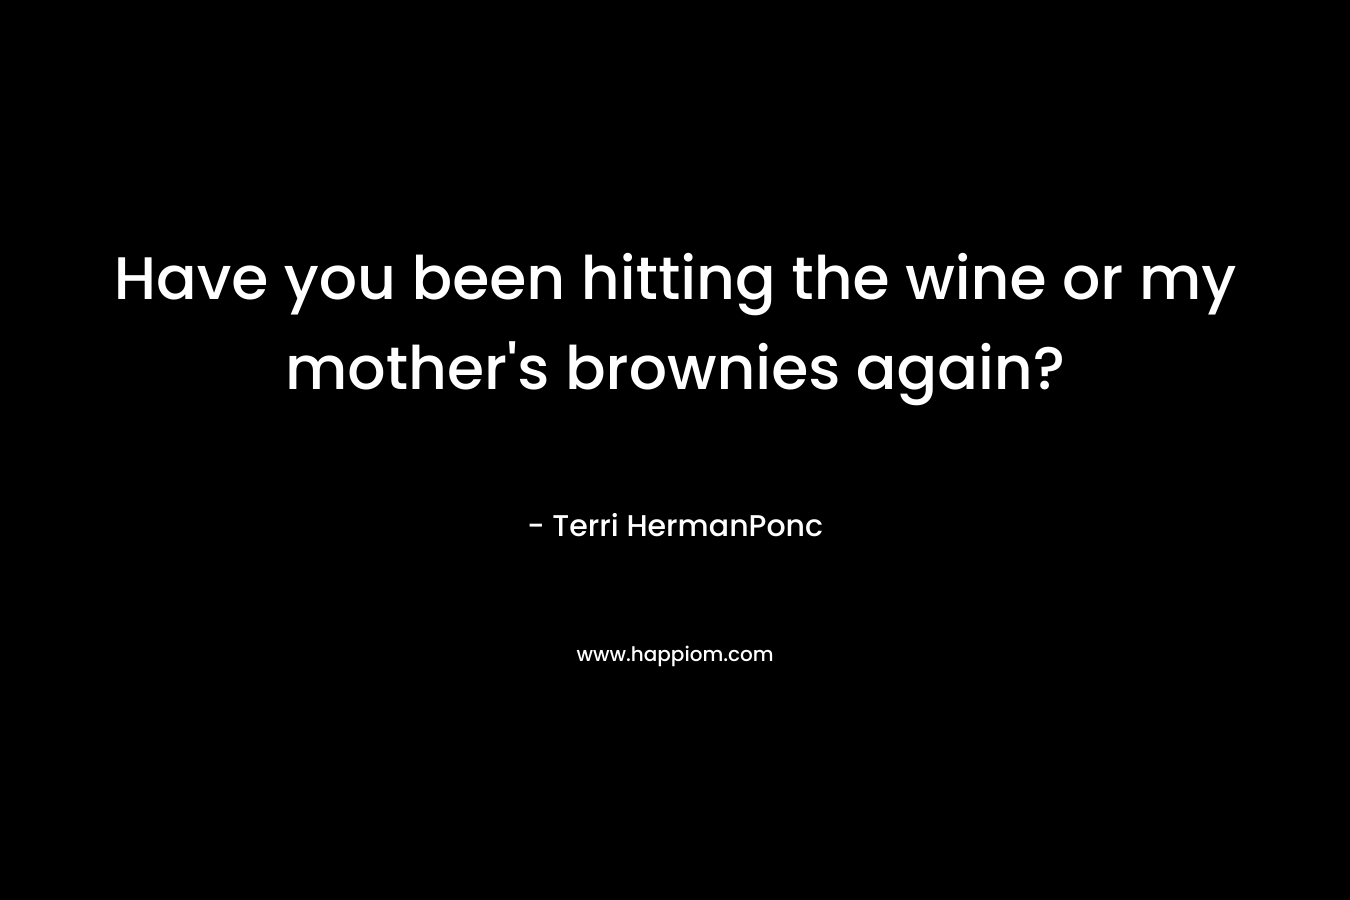 Have you been hitting the wine or my mother's brownies again?